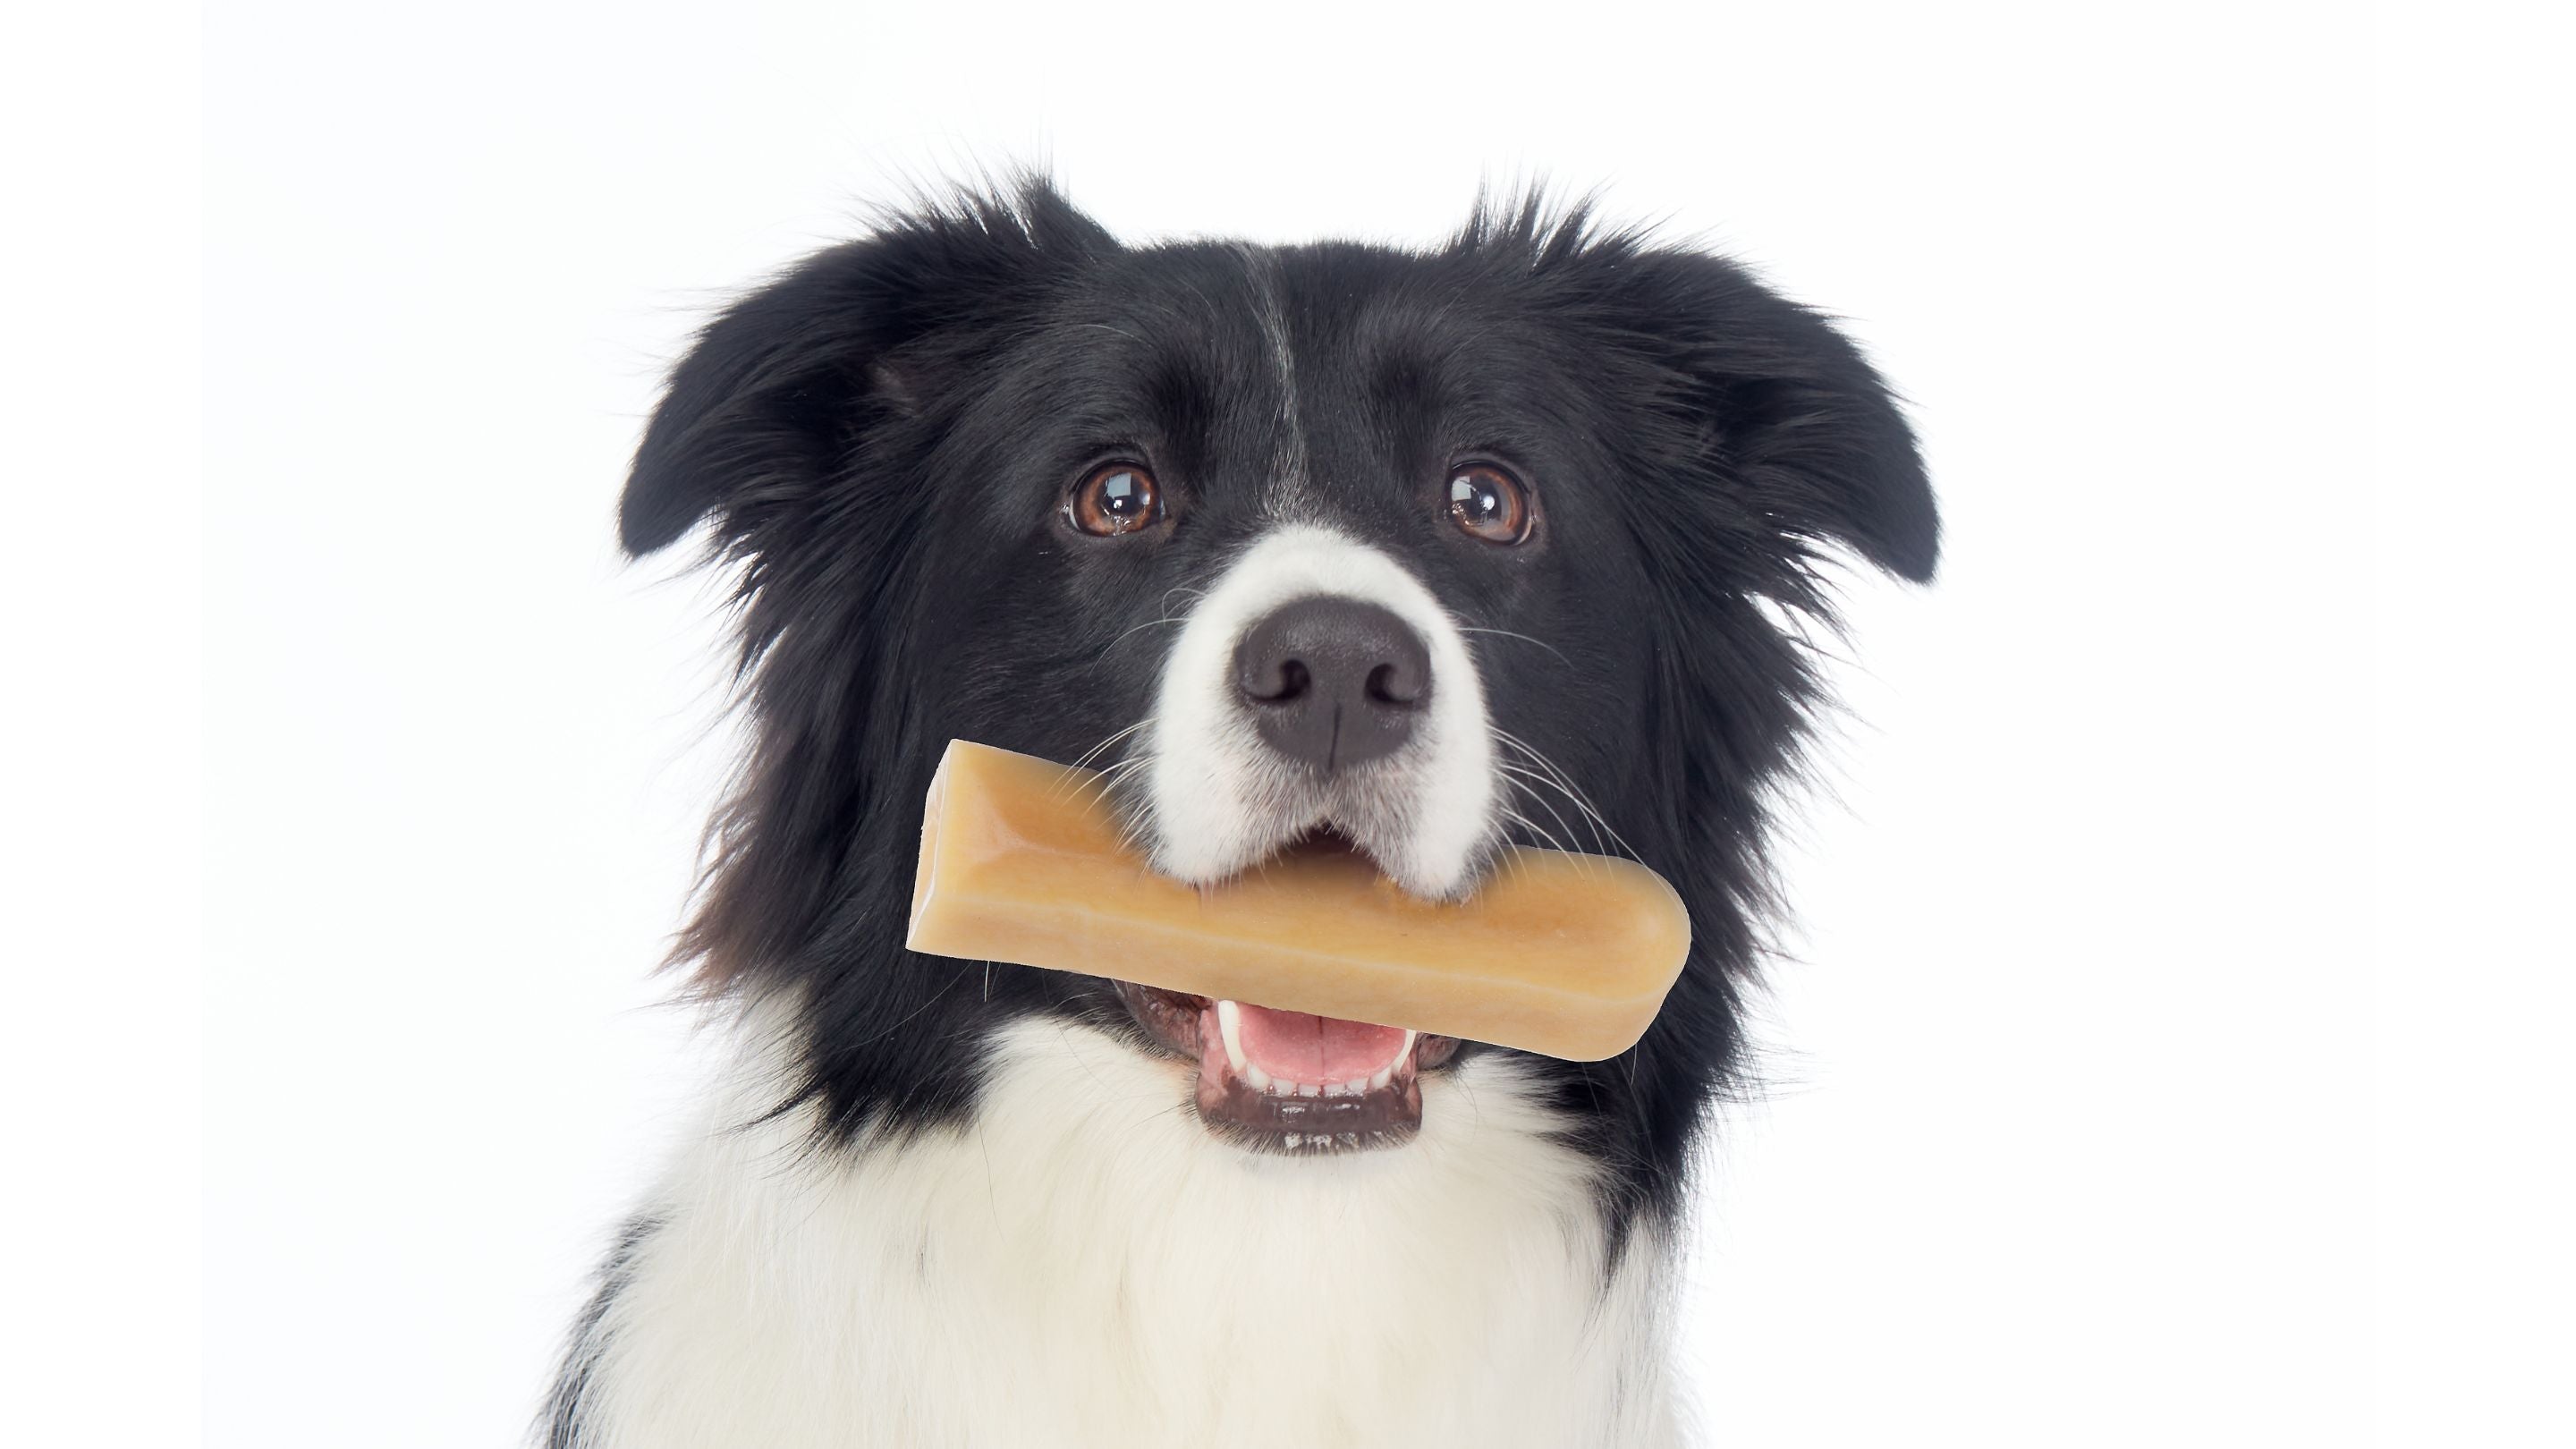 Black and white collie type dog holding Himalayan Dog Chew in mouth